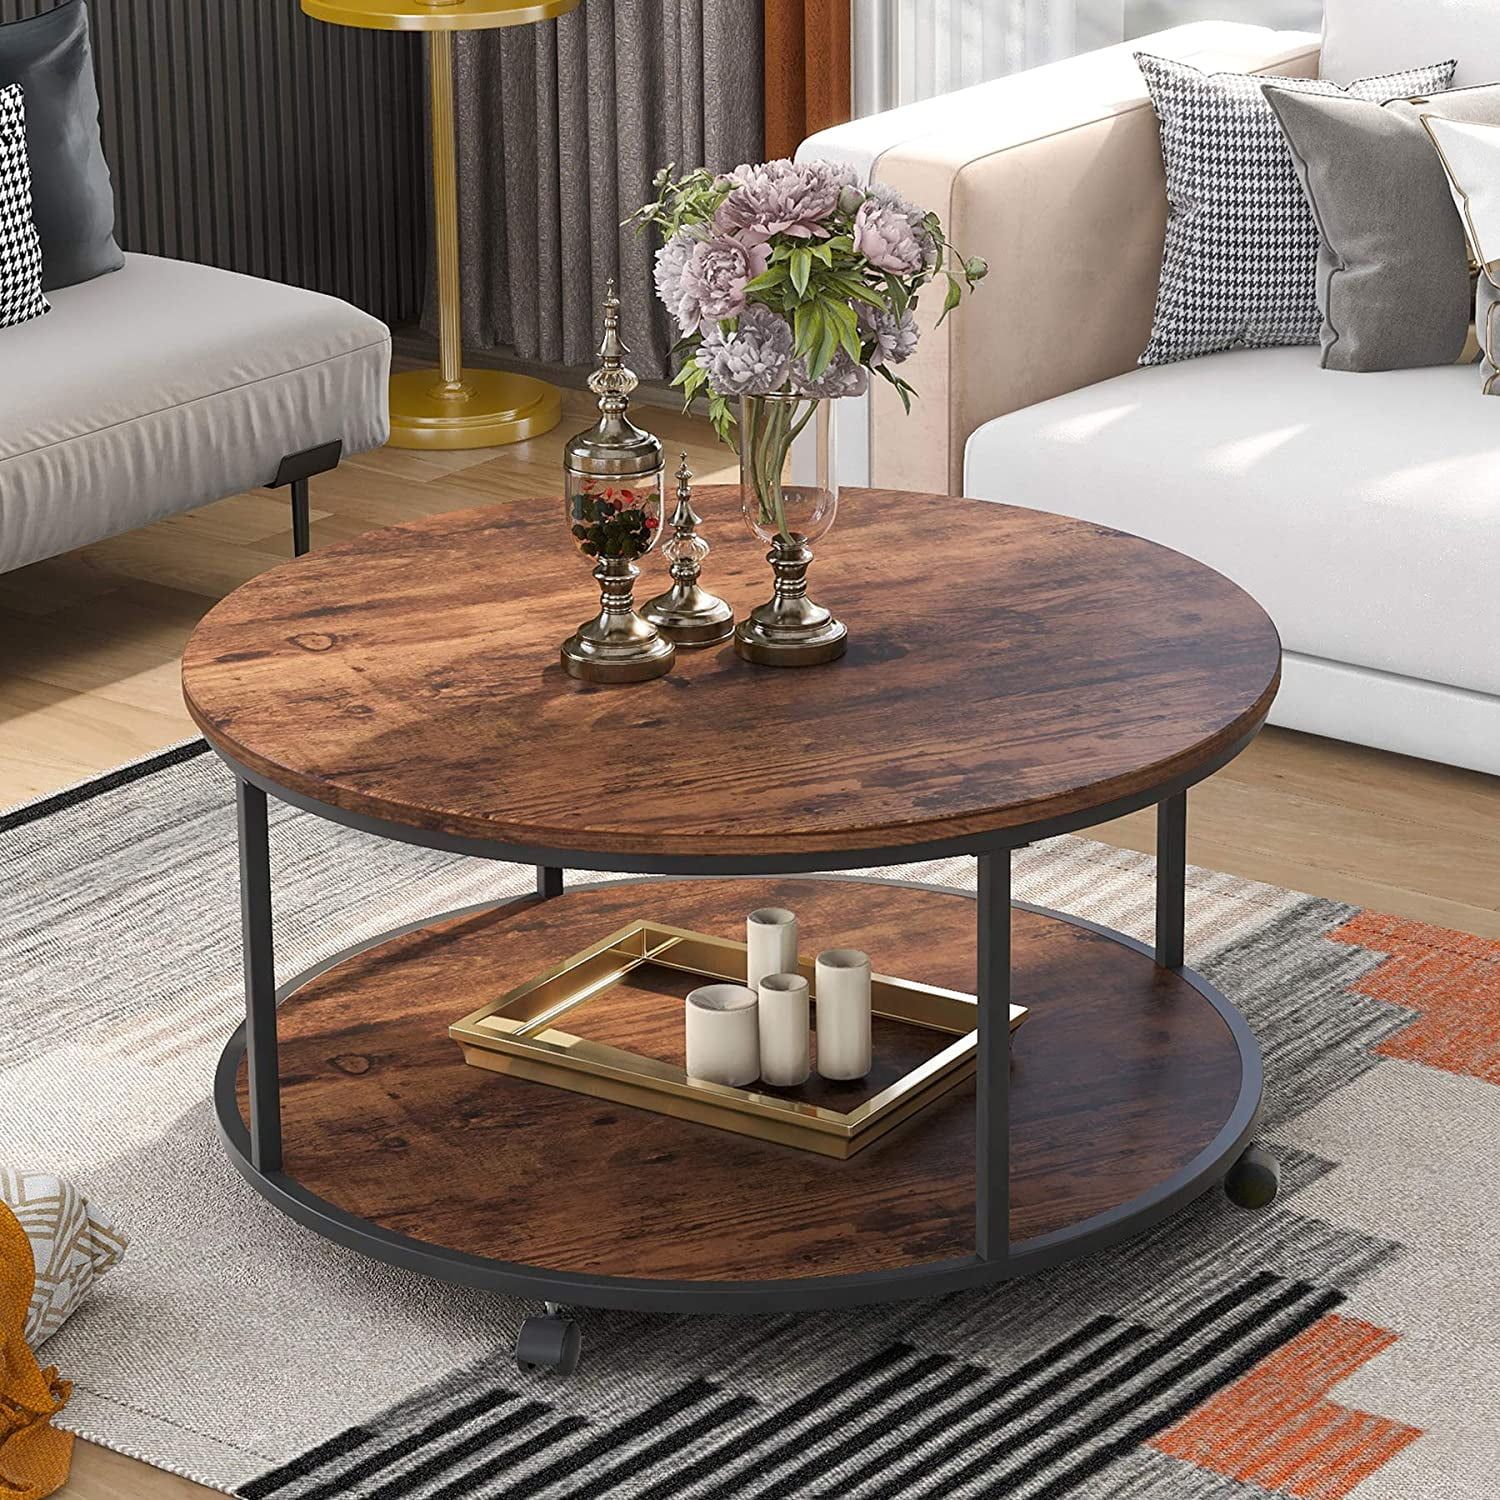 Rustic Round Coffee Table – Photos Throughout Coffee Tables With Round Wooden Tops (Photo 6 of 15)